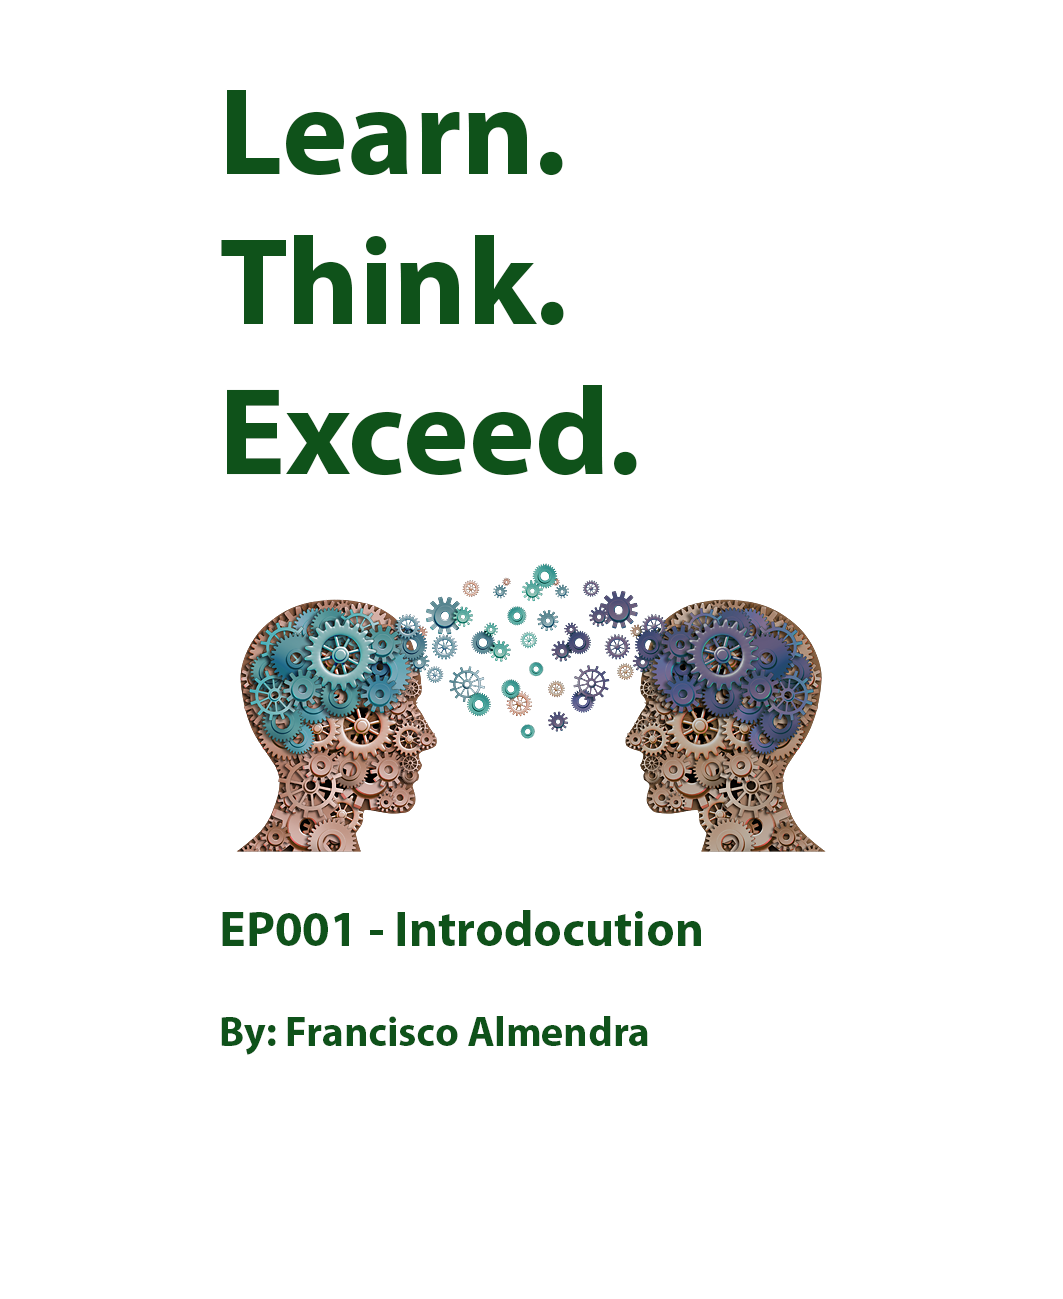 Learn Think Exceed - EP001 - Introduction